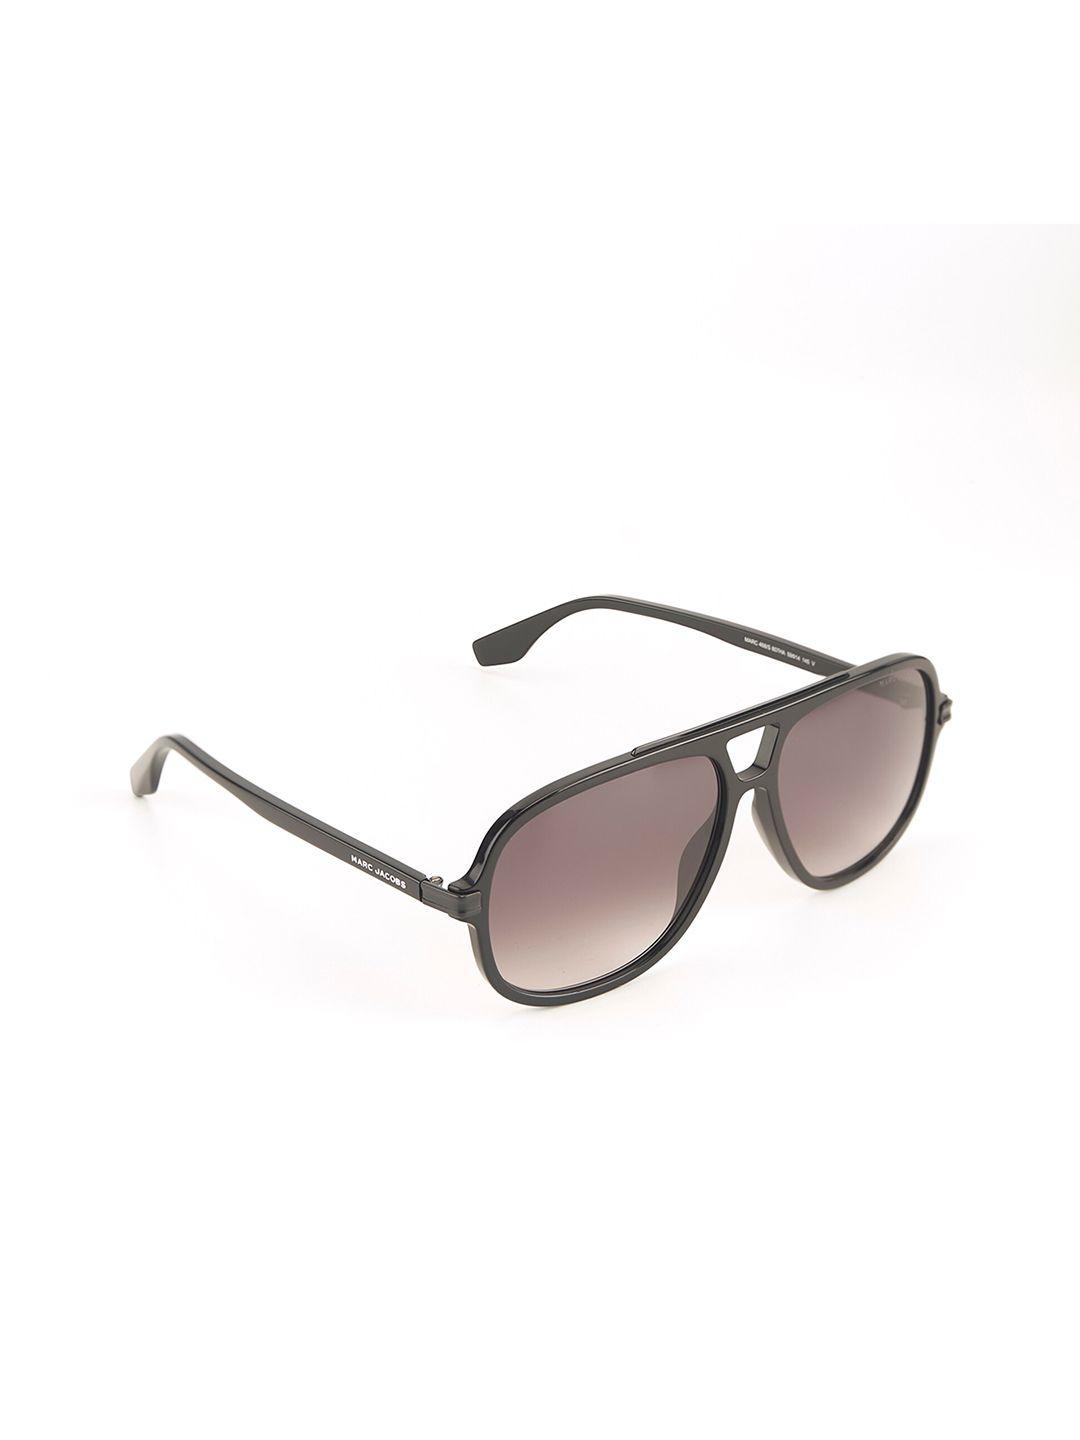 marc-jacobs-men-square-sunglasses-with-uv-protected-lens-20287180759ha